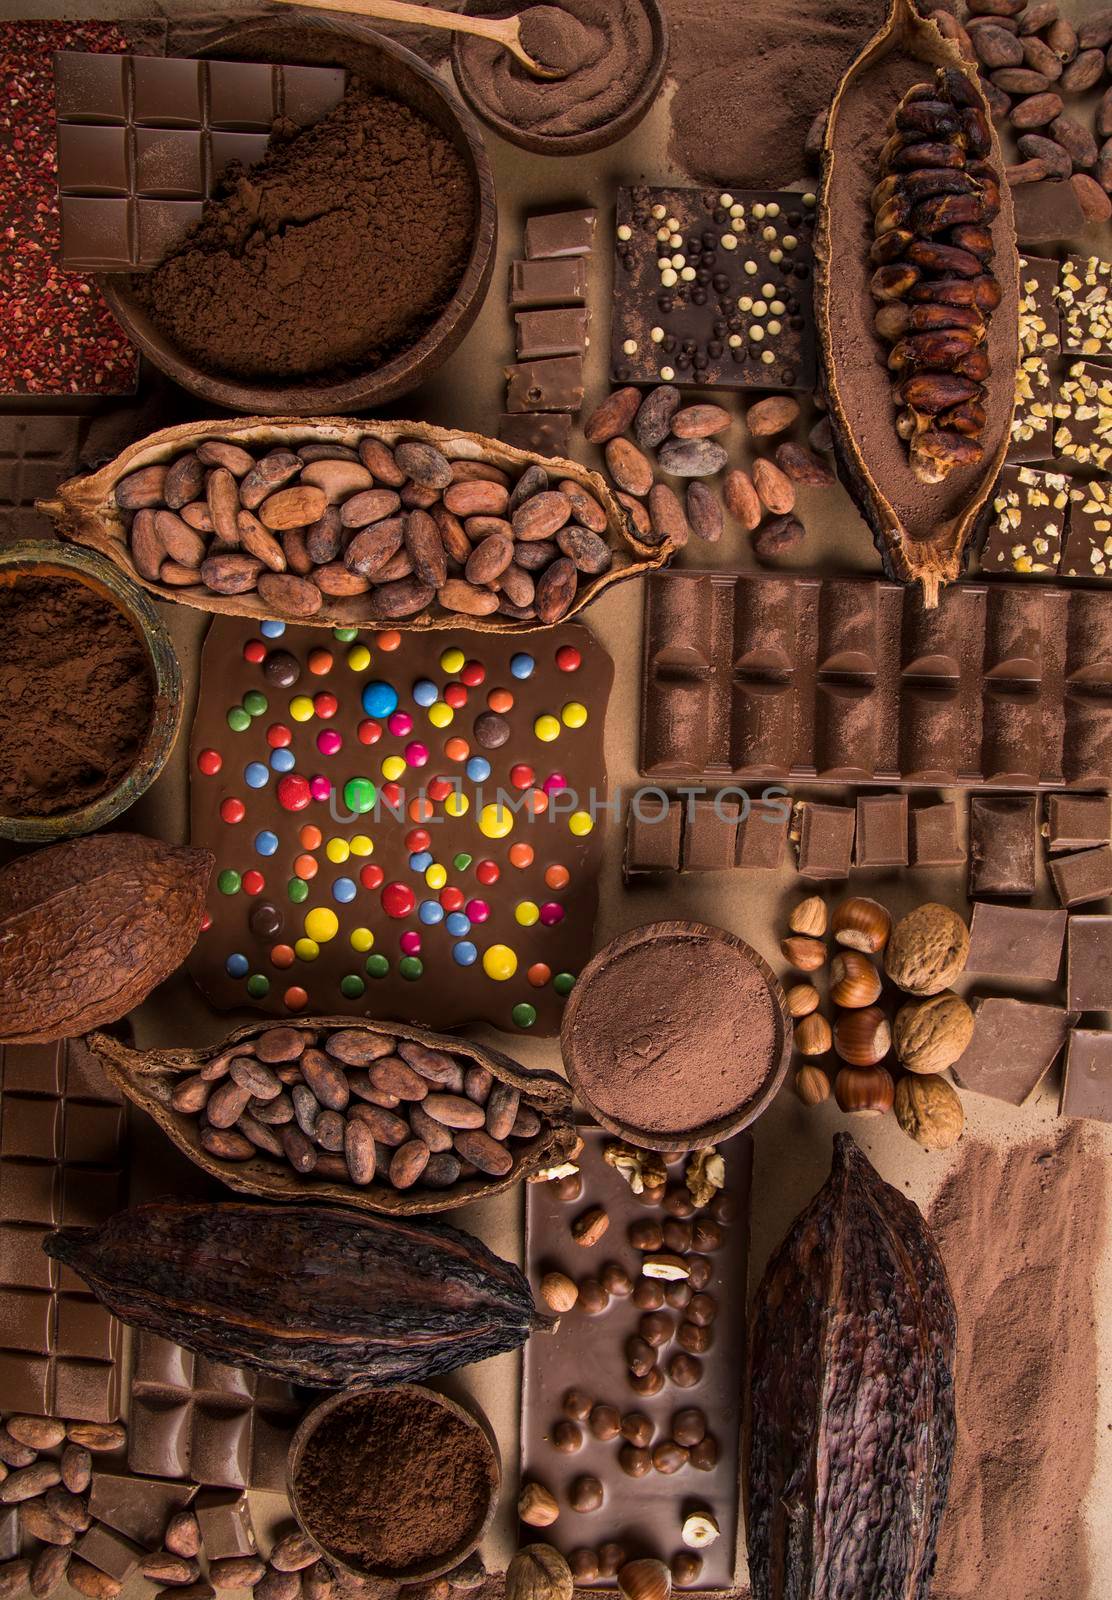 Dark homemade chocolate bars and cocoa pod on wooden